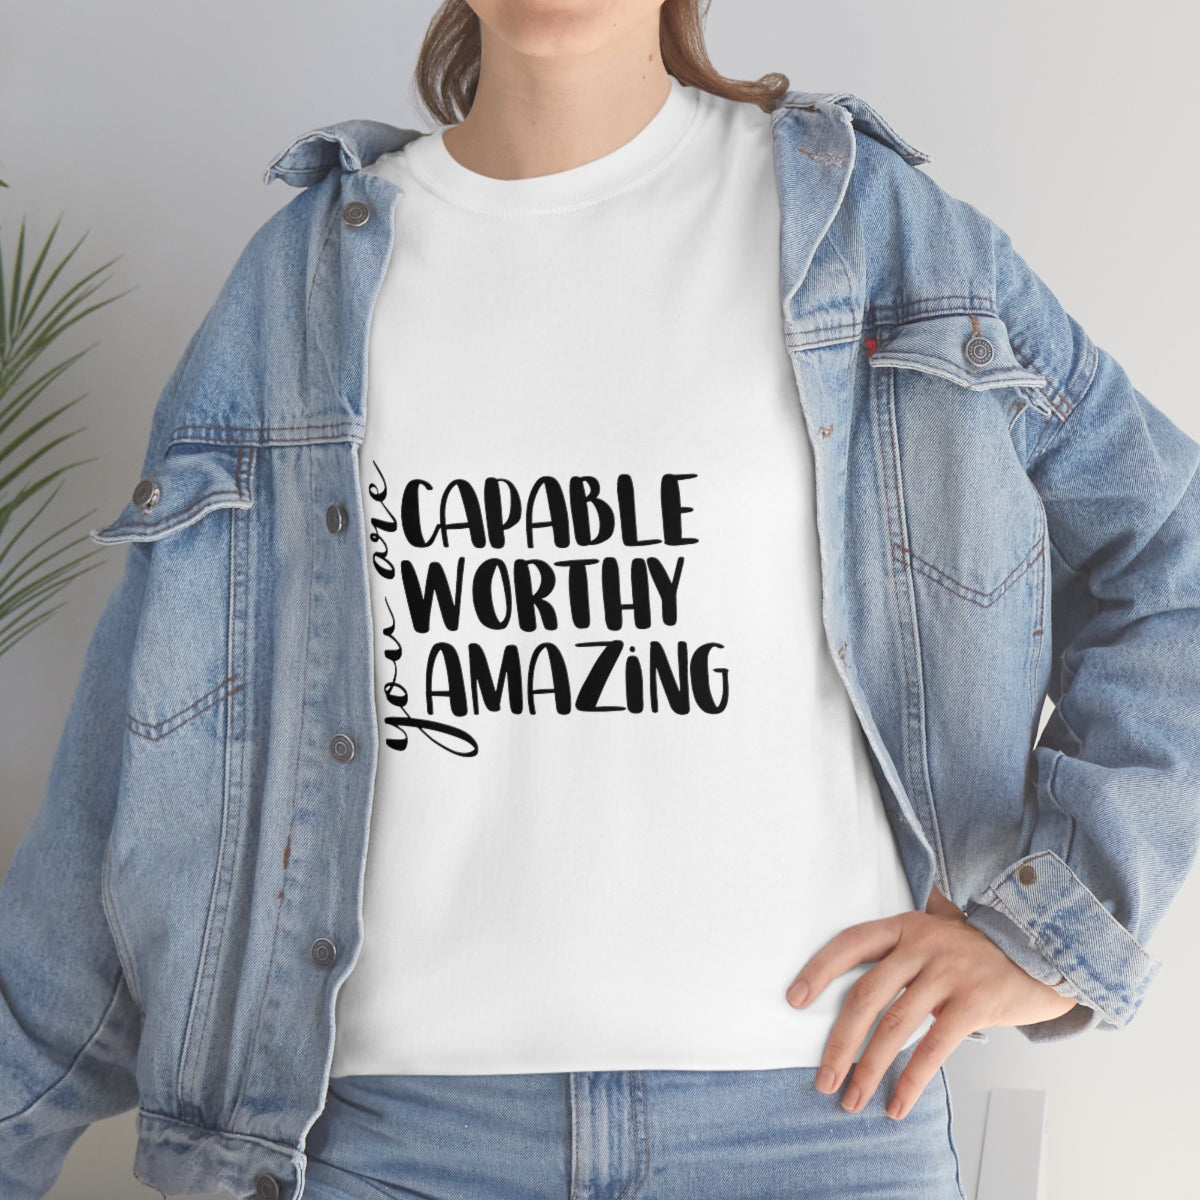 Stay Motivated and Inspired with Our "You are capable and worthy" T-Shirt